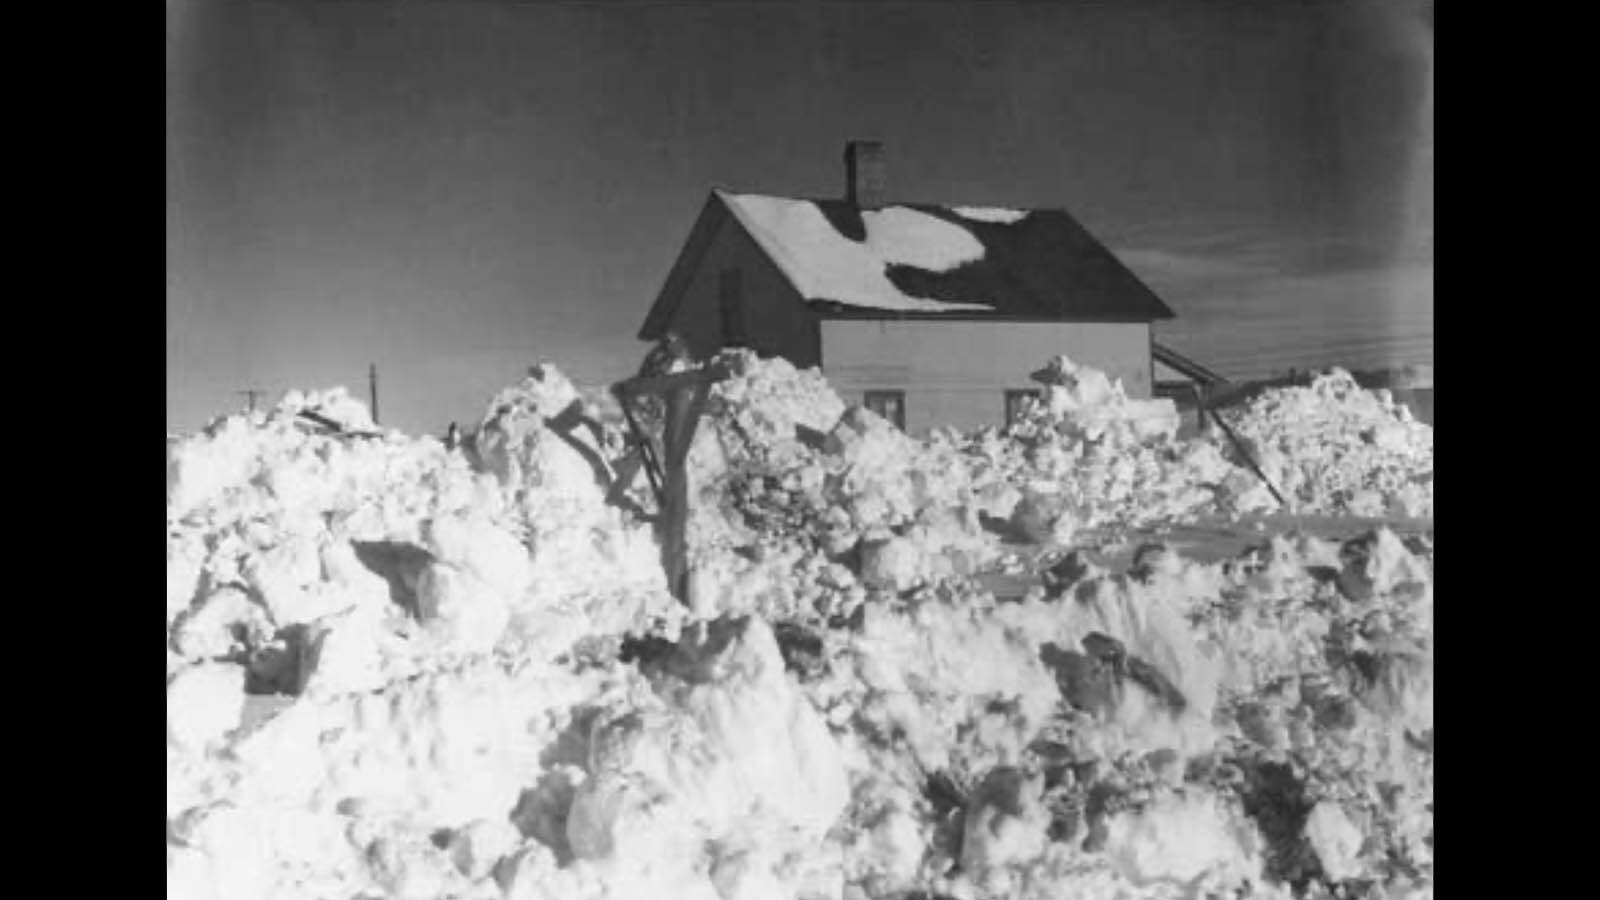 Unidentified house in Sweetwater County surrounded by piles of snow.